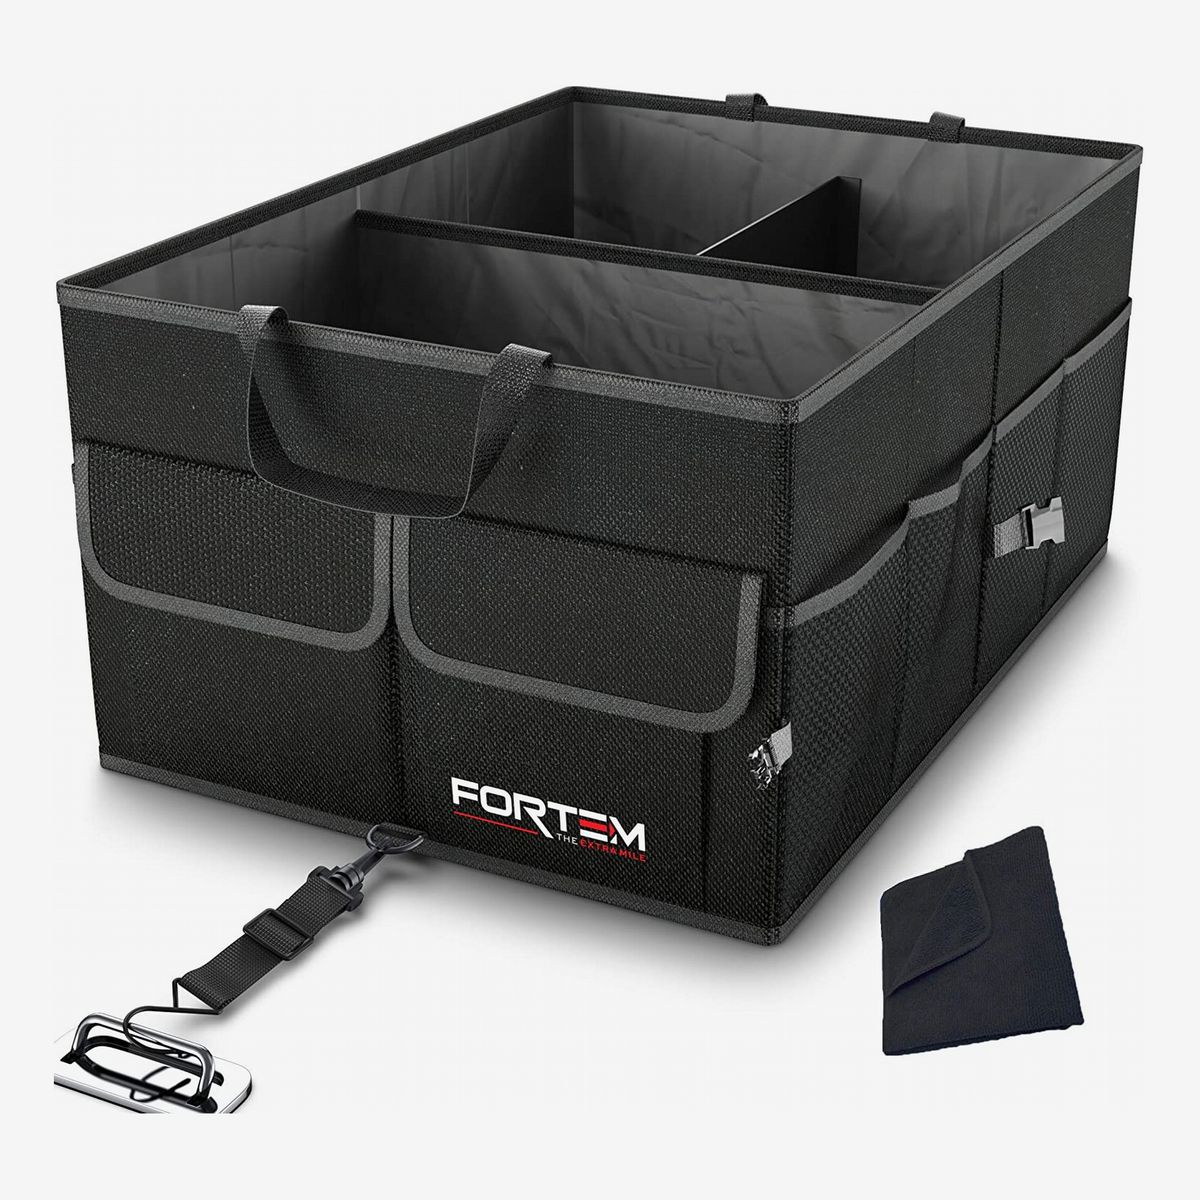 Car Trunk Storage Organizer Collapsible Cargo Storage Containers Portable Multi Compartments with Strap Handle 